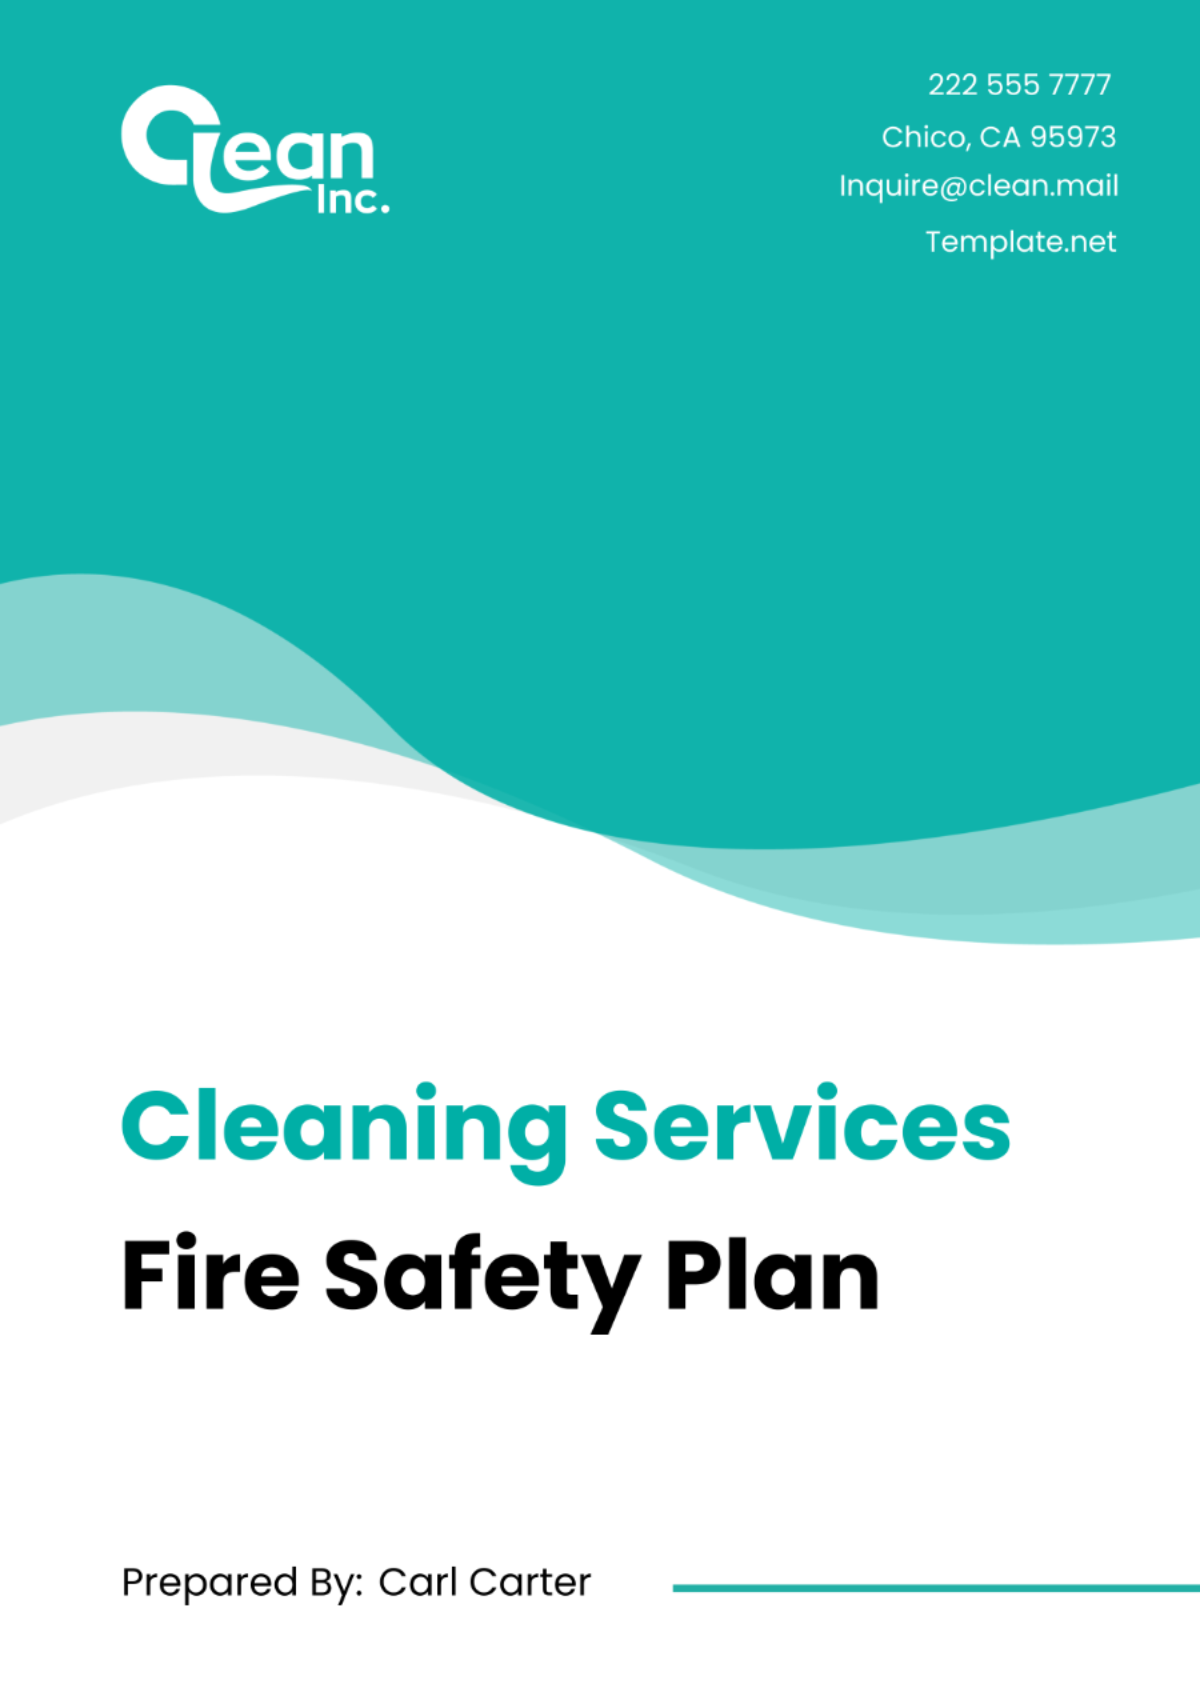 Cleaning Services Fire Safety Plan Template